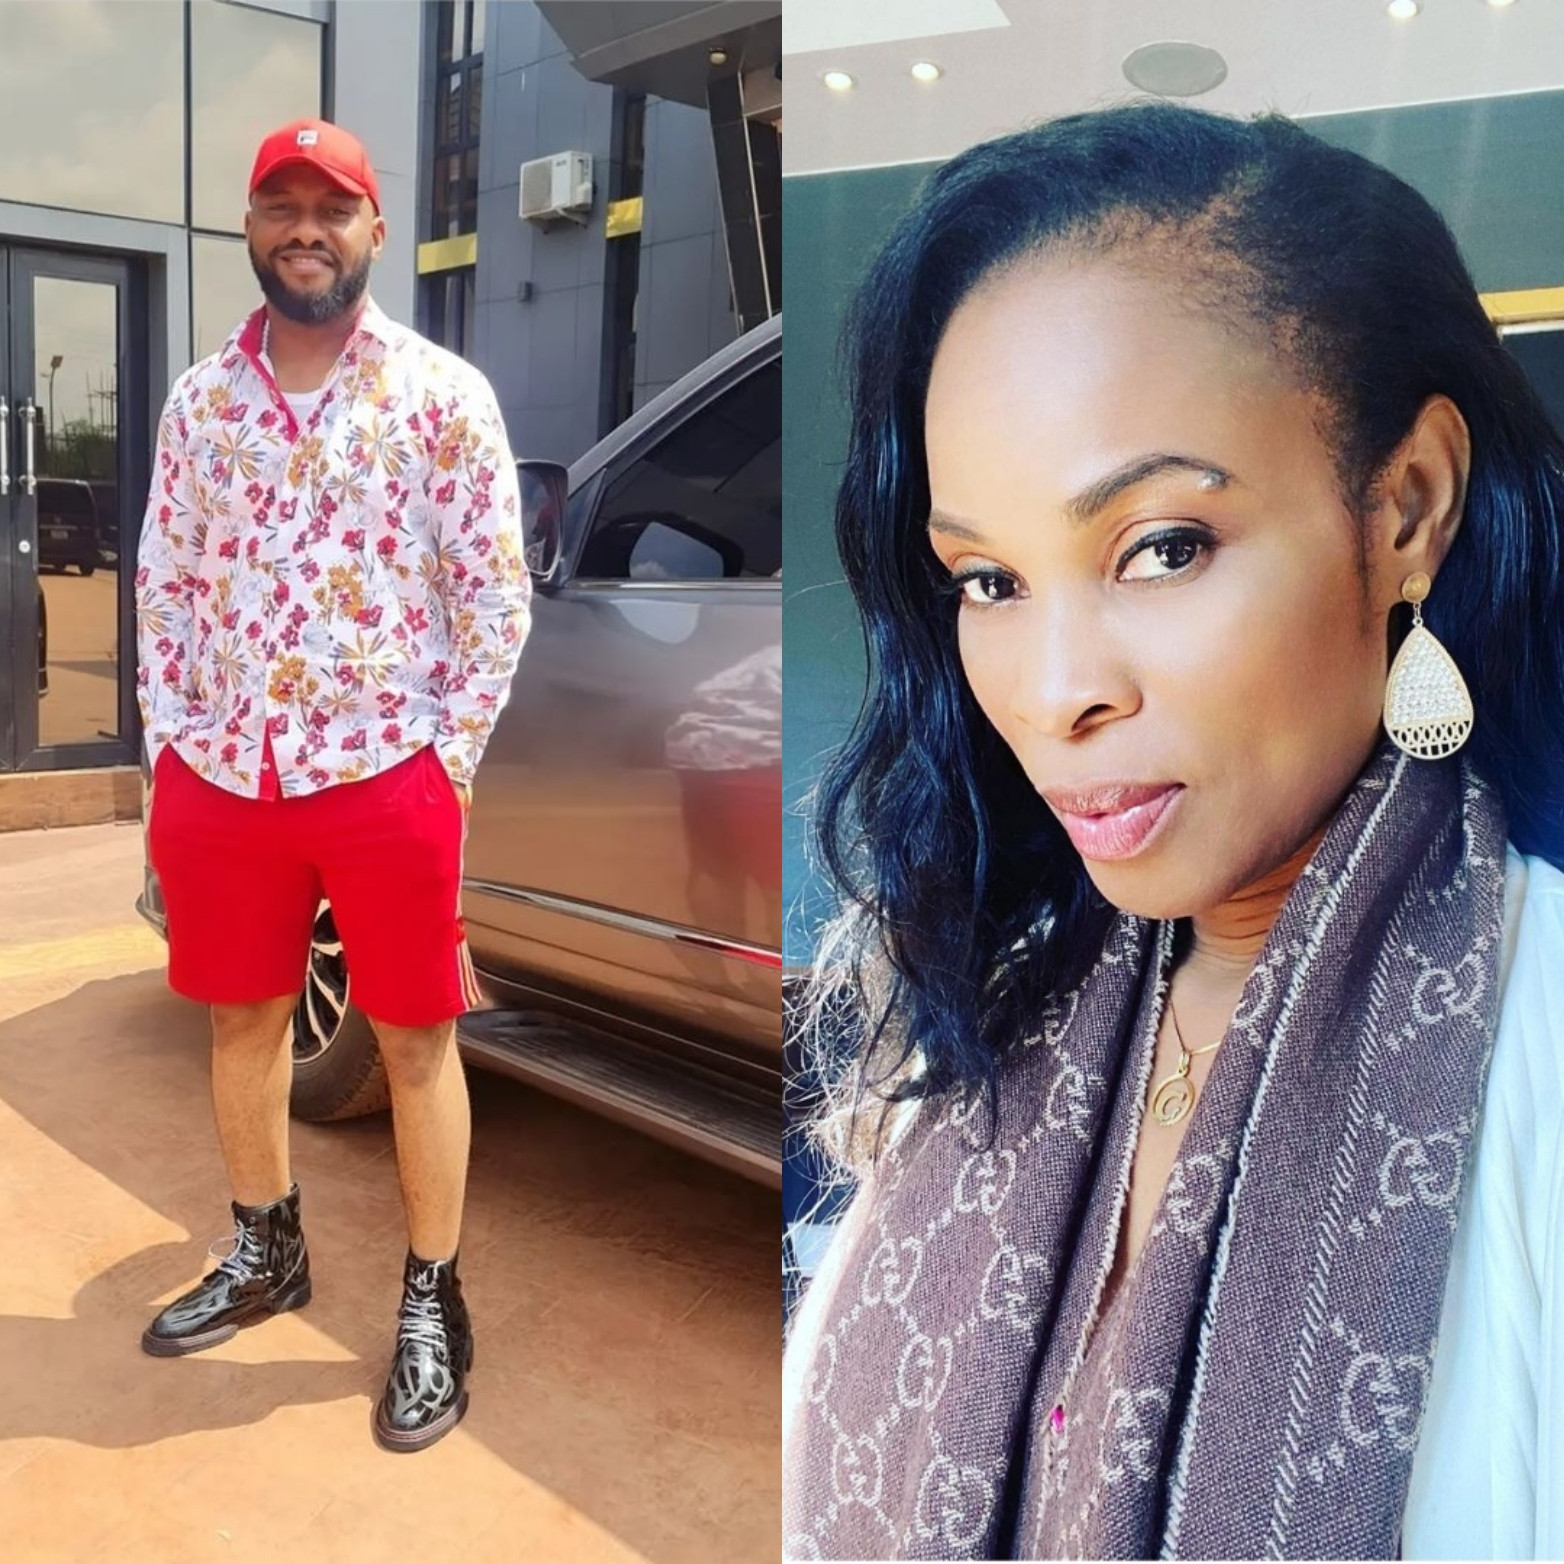 "We are not stray dogs like you who couldn't zip up his panties" Georgina Onuoha drags Yul Edochie by his "little third leg" after he threw shade at her and other actresses following allegations of affair with Apostle Johnson Suleman